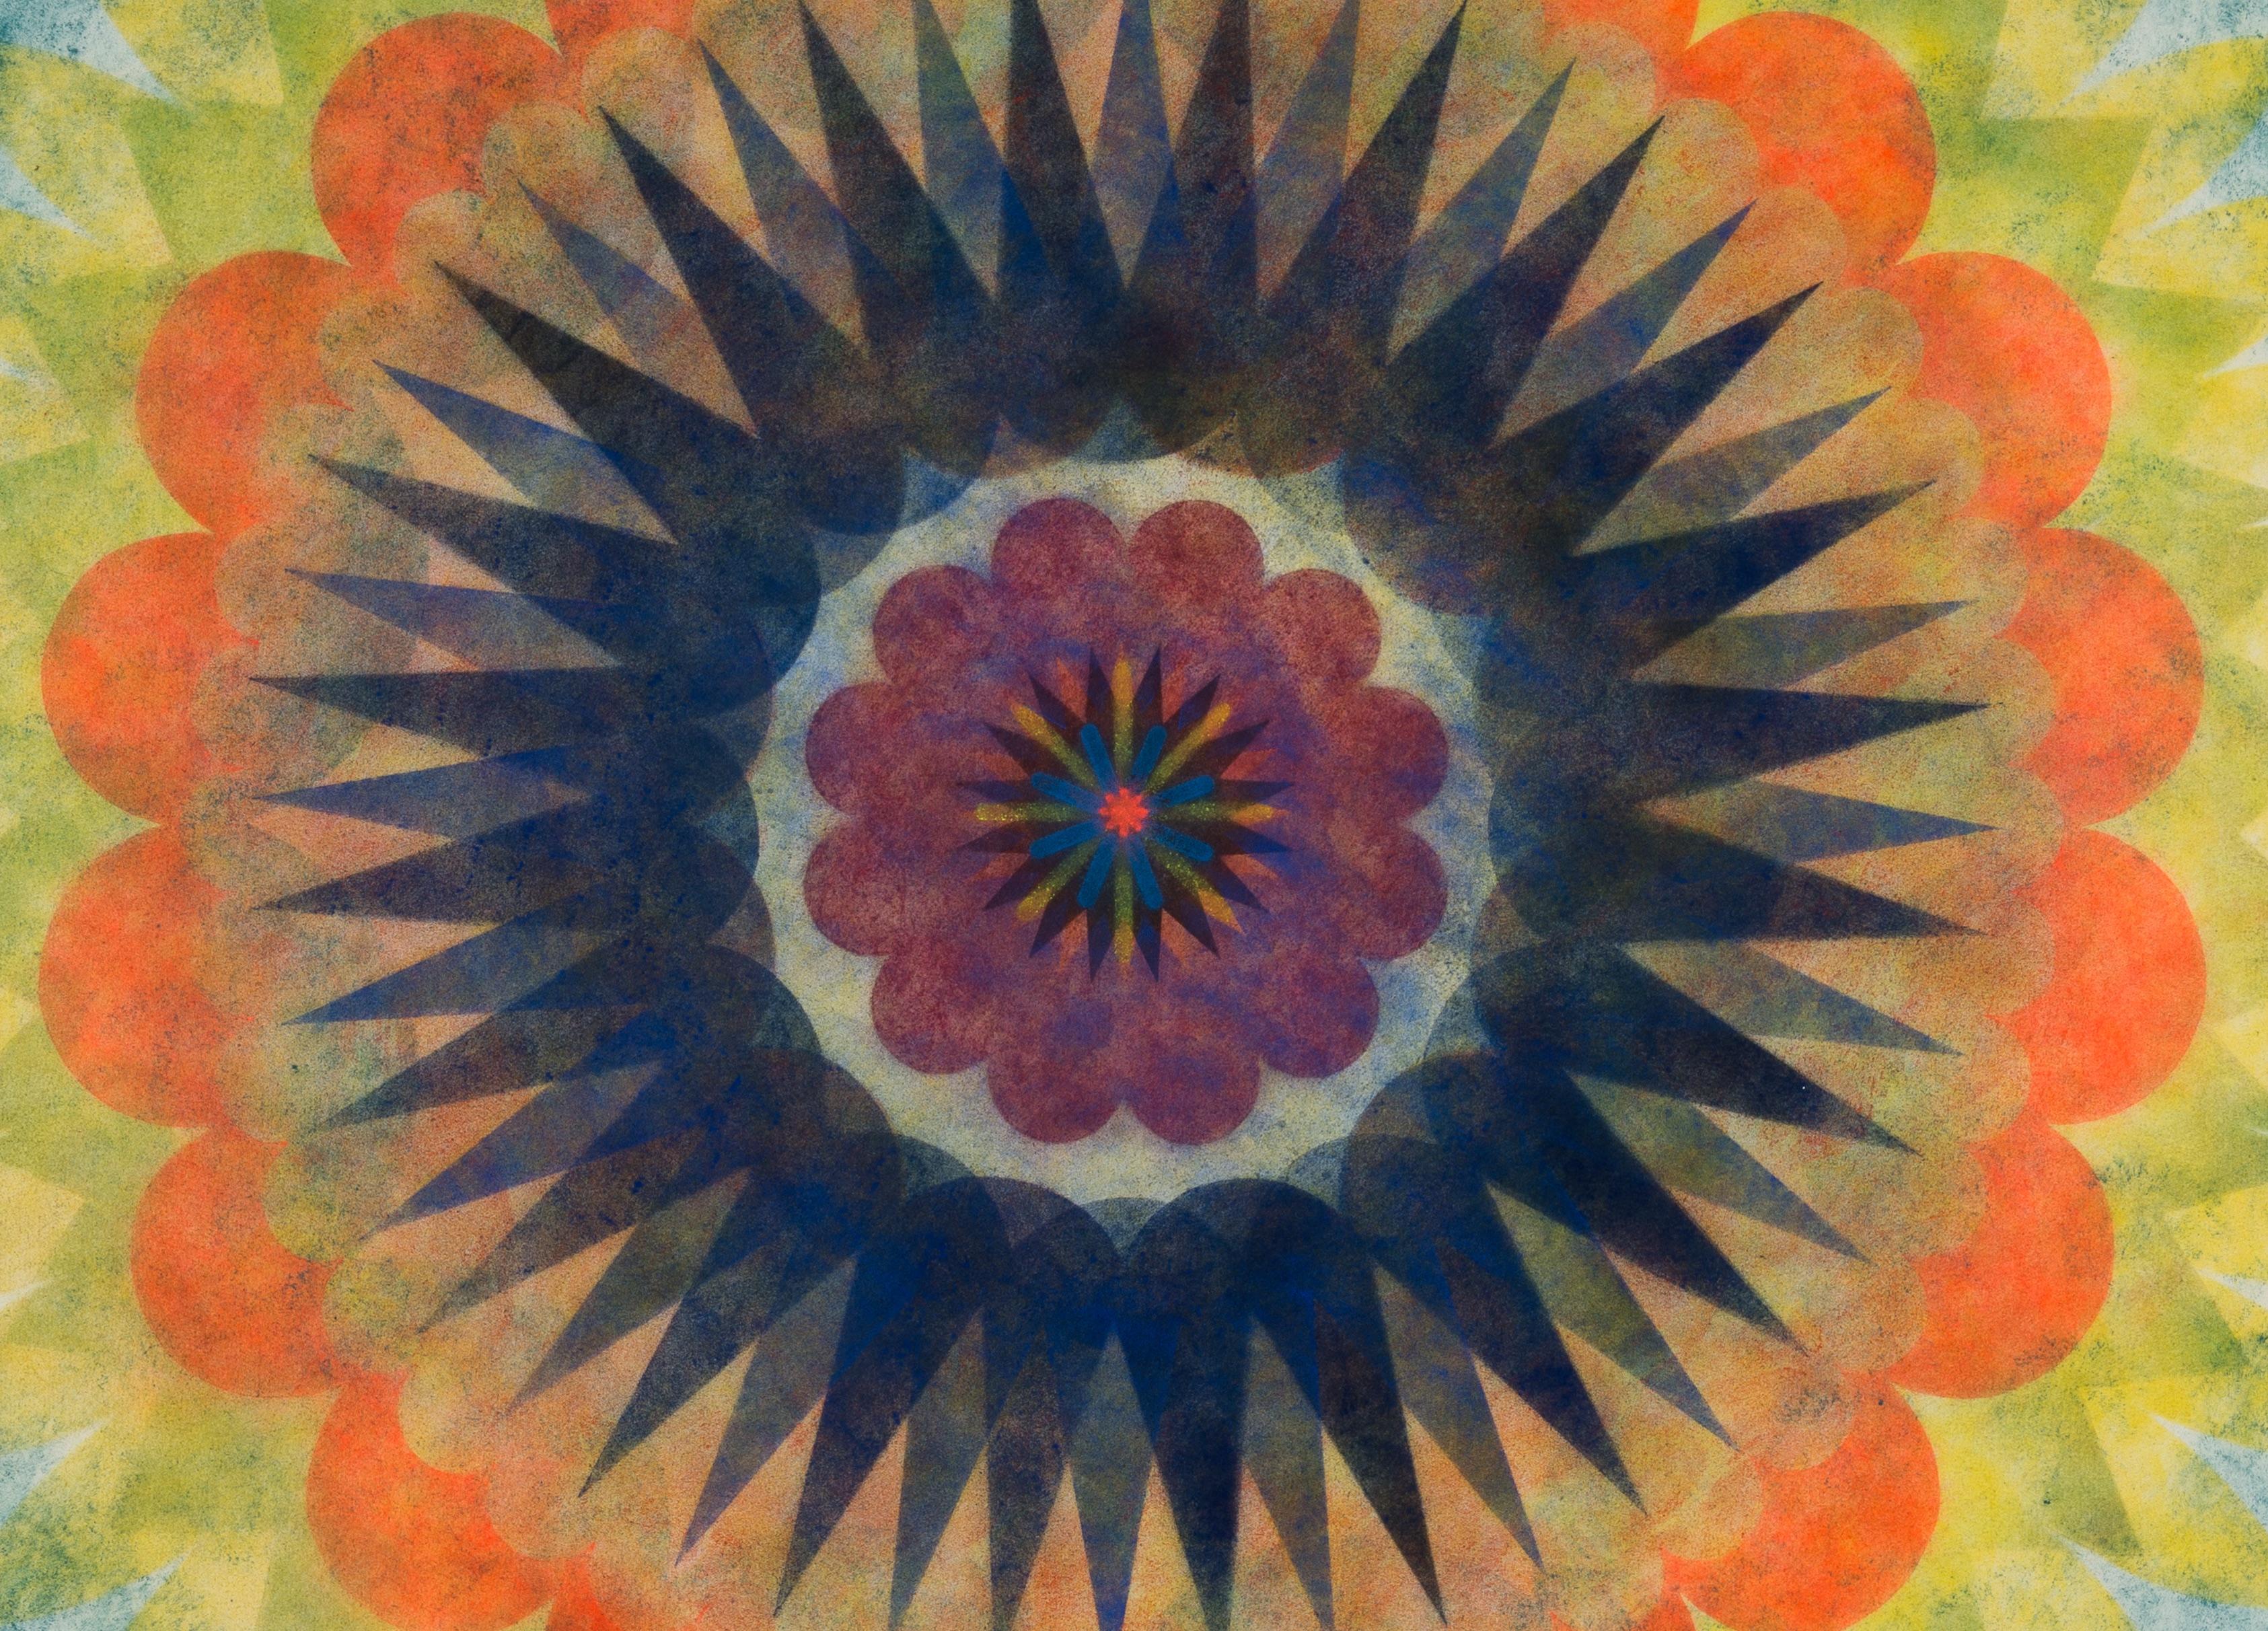 Pop Flower 69, Bright Green, Teal Blue Mandala with Orange, Maroon and Navy - Contemporary Art by Mary Judge